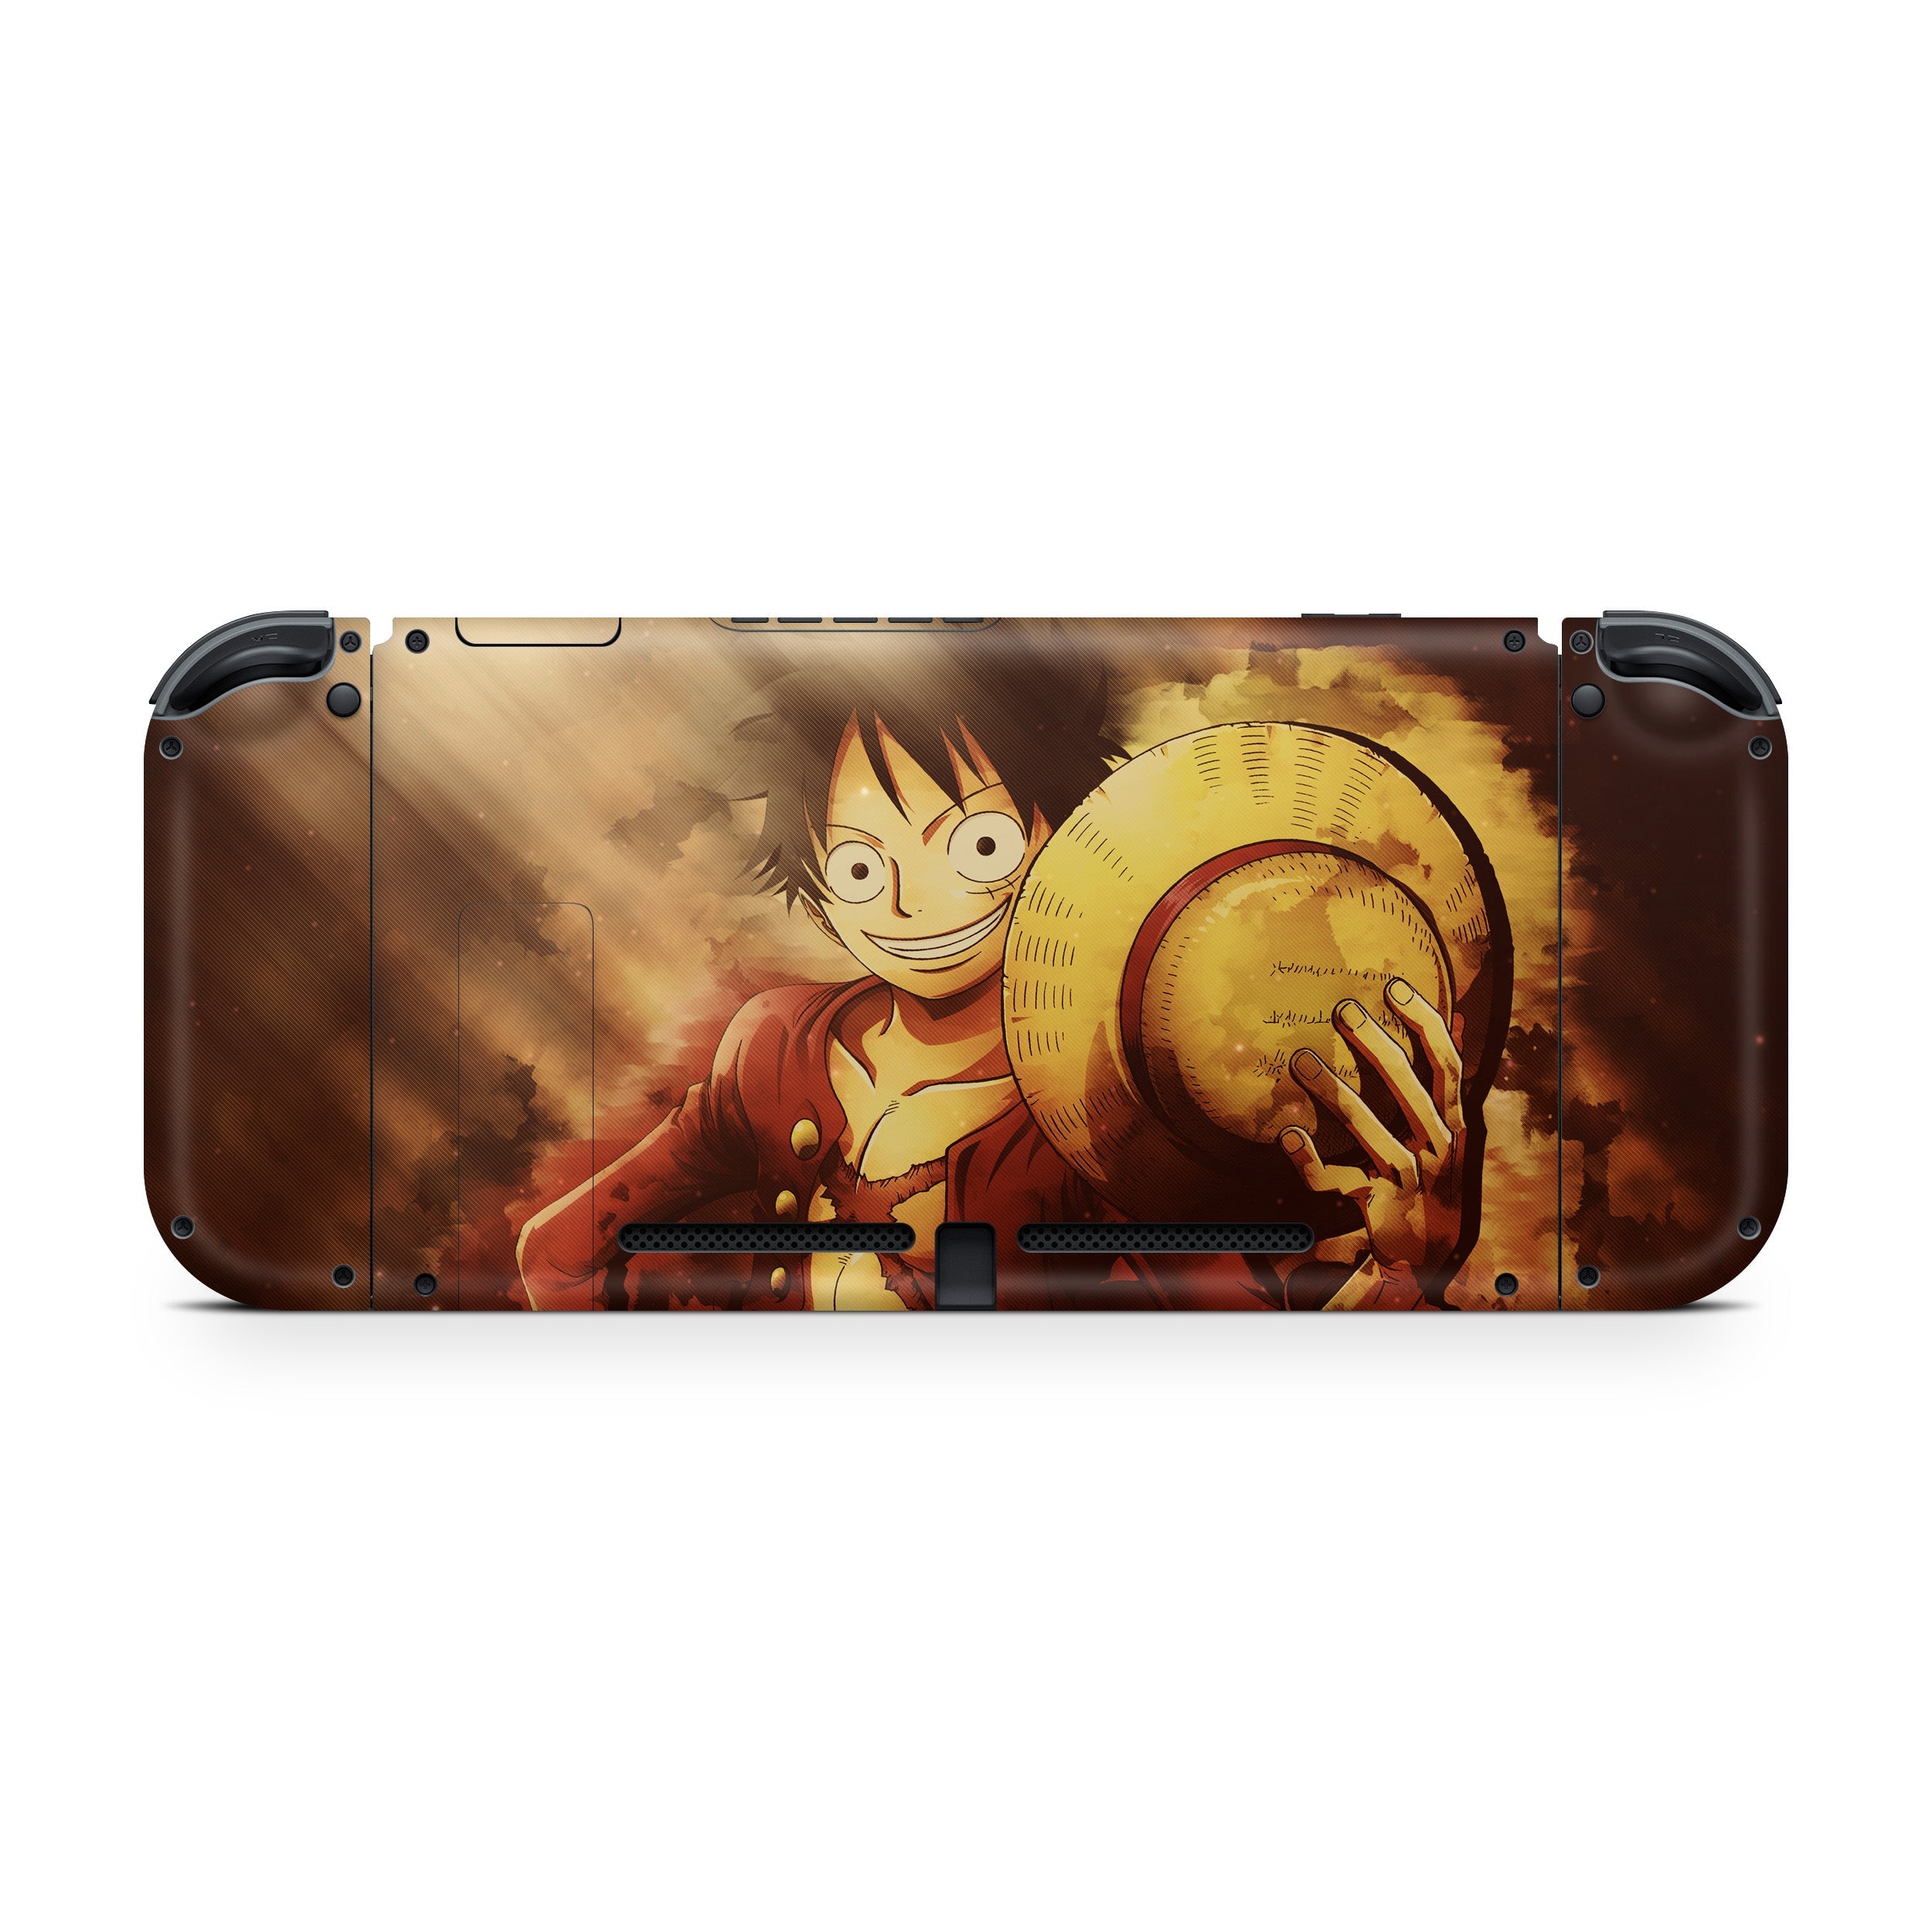 A video game skin featuring a One Piece Monkey D Luffy design for the Nintendo Switch.